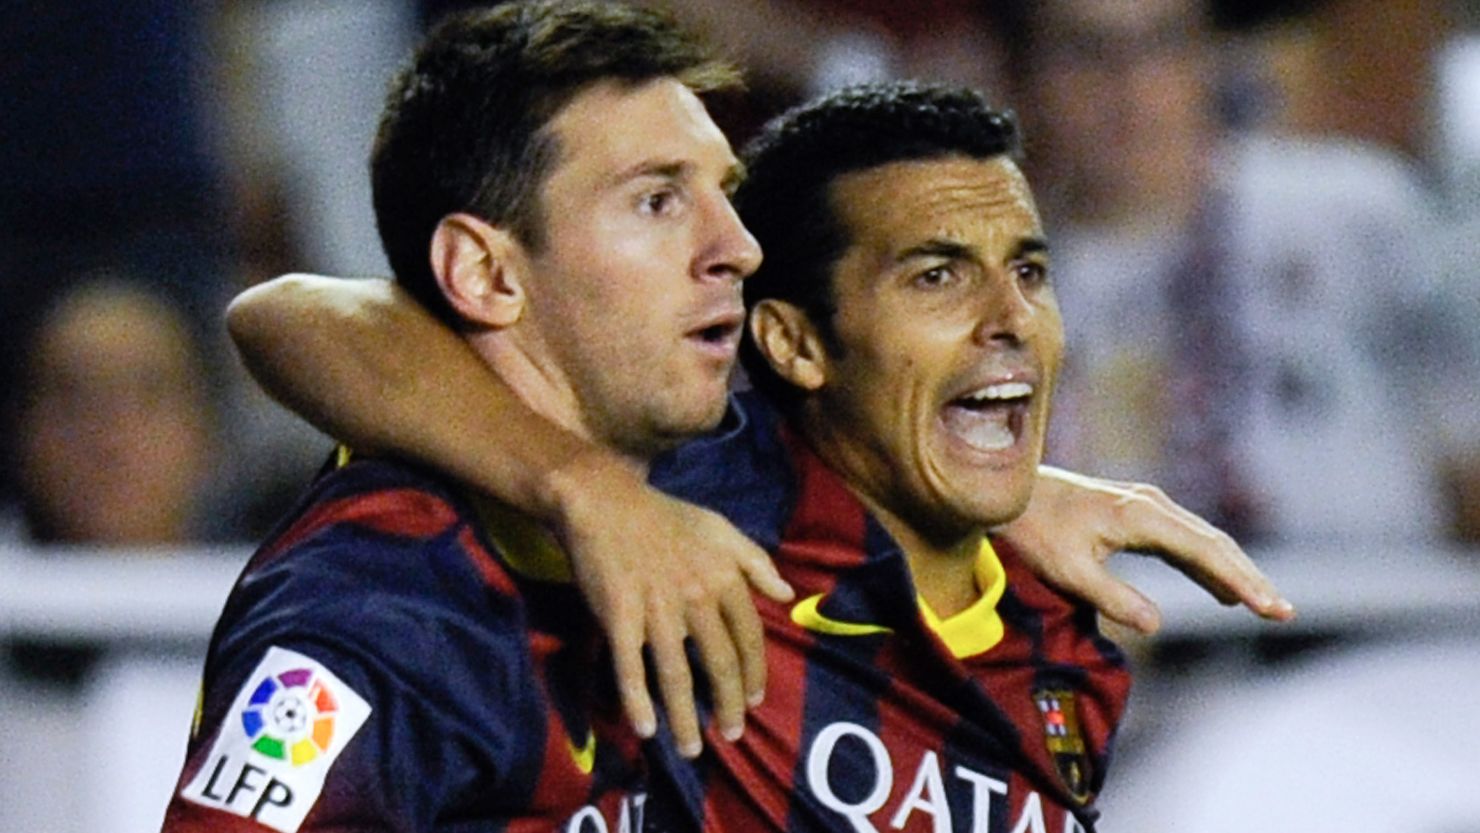 Barcelona's hat-trick hero Pedro Rodriguez (R) celebrates with Lionel Messi after scoring the opening goal against Rayo Vallecano.